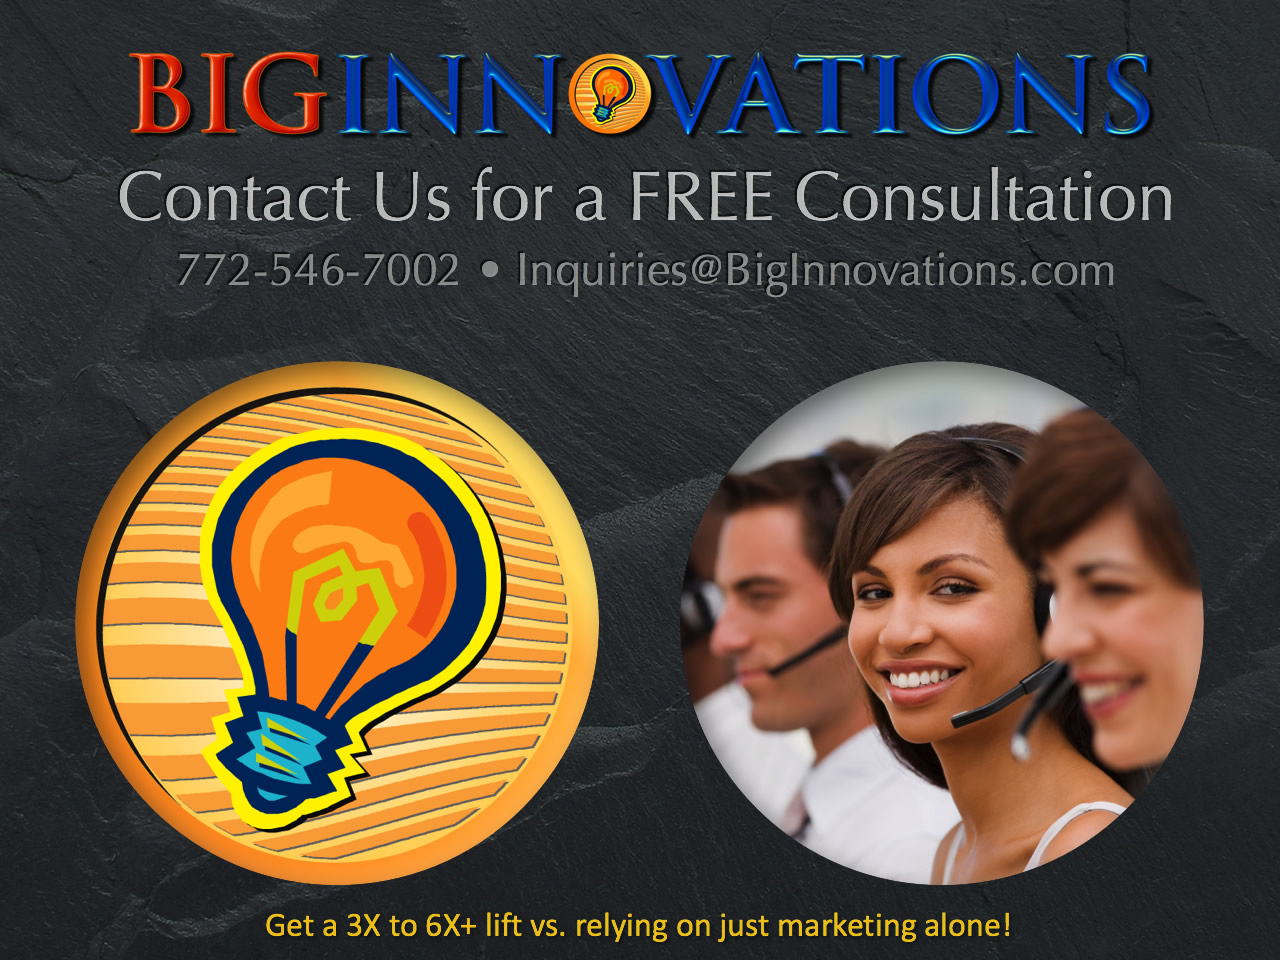 Contact Big Innovations for a free consultation